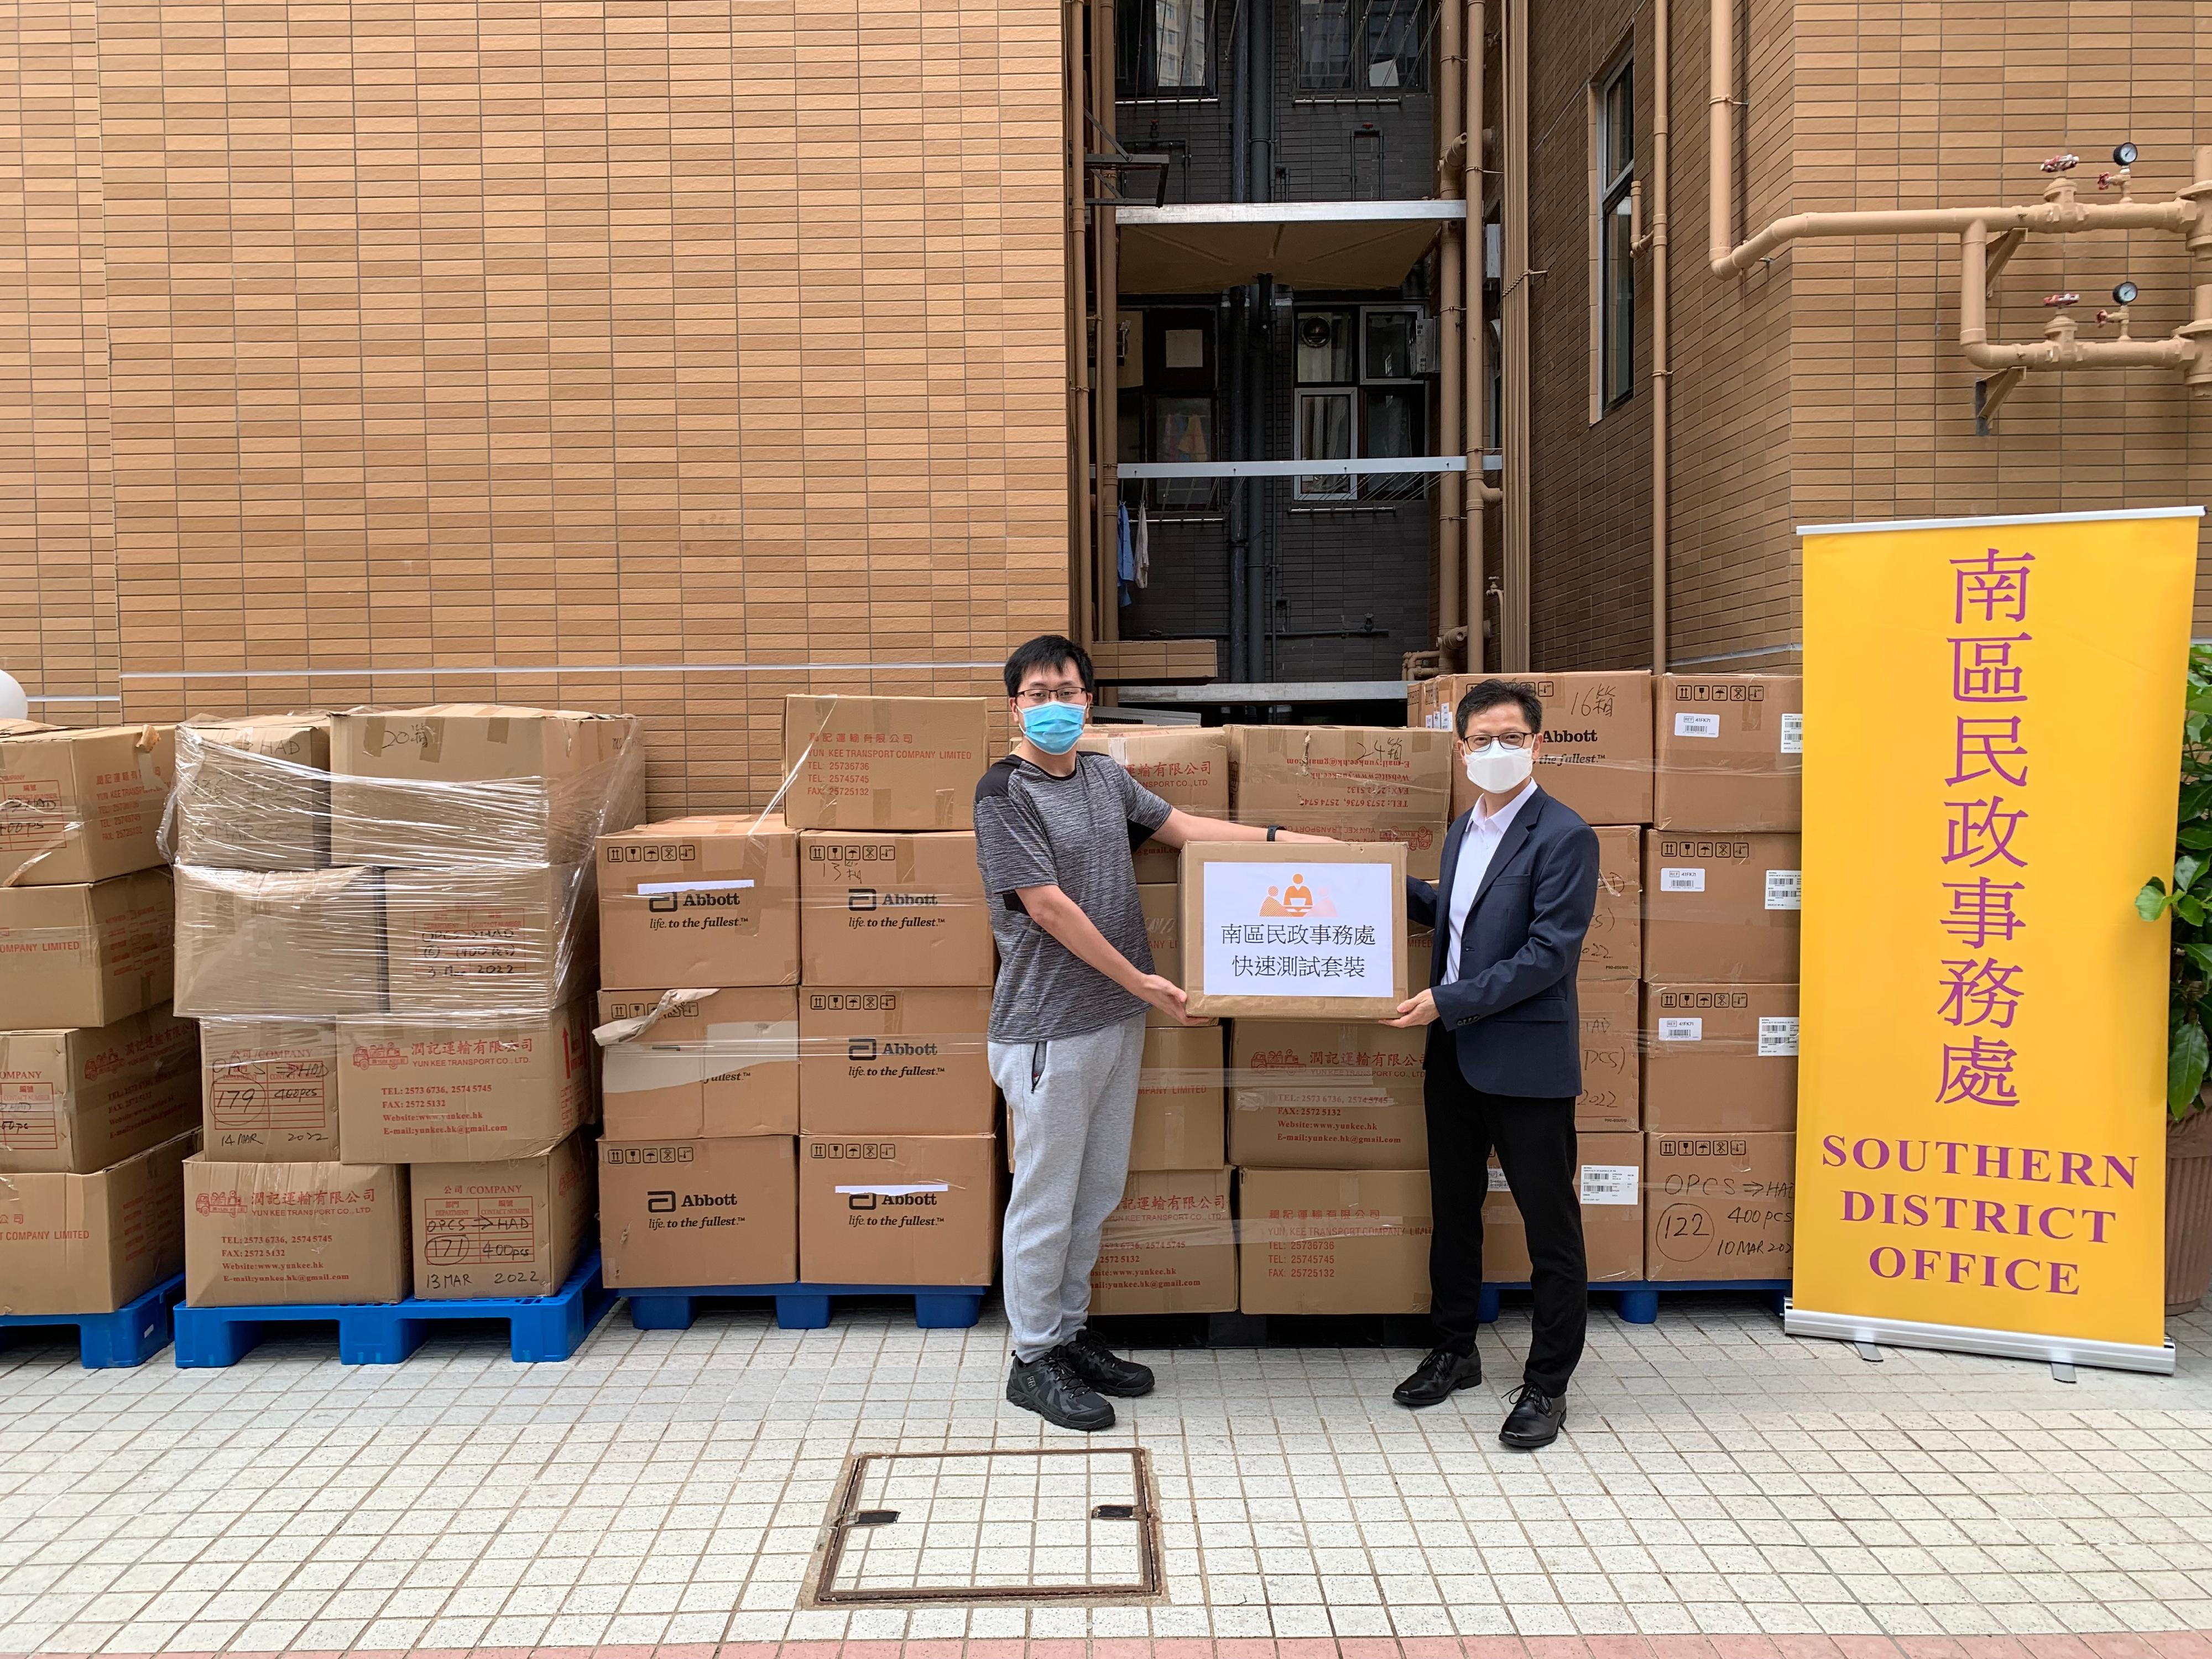 The Southern District Office today (May 24) distributed COVID-19 rapid test kits to households, cleansing workers and property management staff living and working in Chi Fu Fa Yuen for voluntary testing through the property management company.